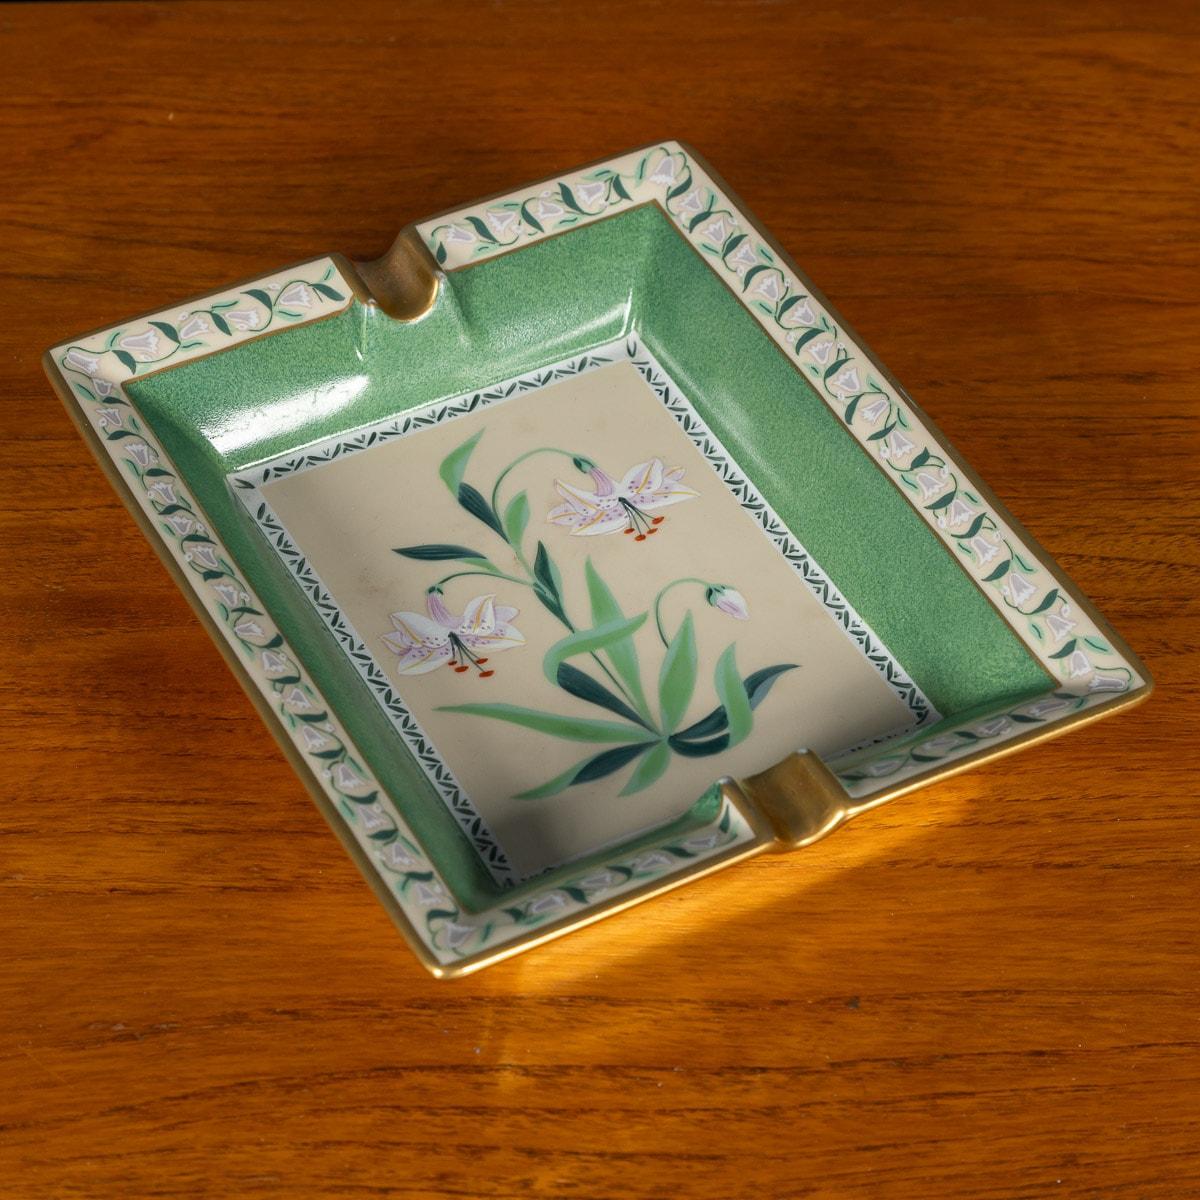 A ceramic ashtray by Hermes, made in France in the latter half of the 20th century. These ashtrays have always been very collectable with the vintage models in particular. This one has a lovely floral theme (white lillies) but at the same time